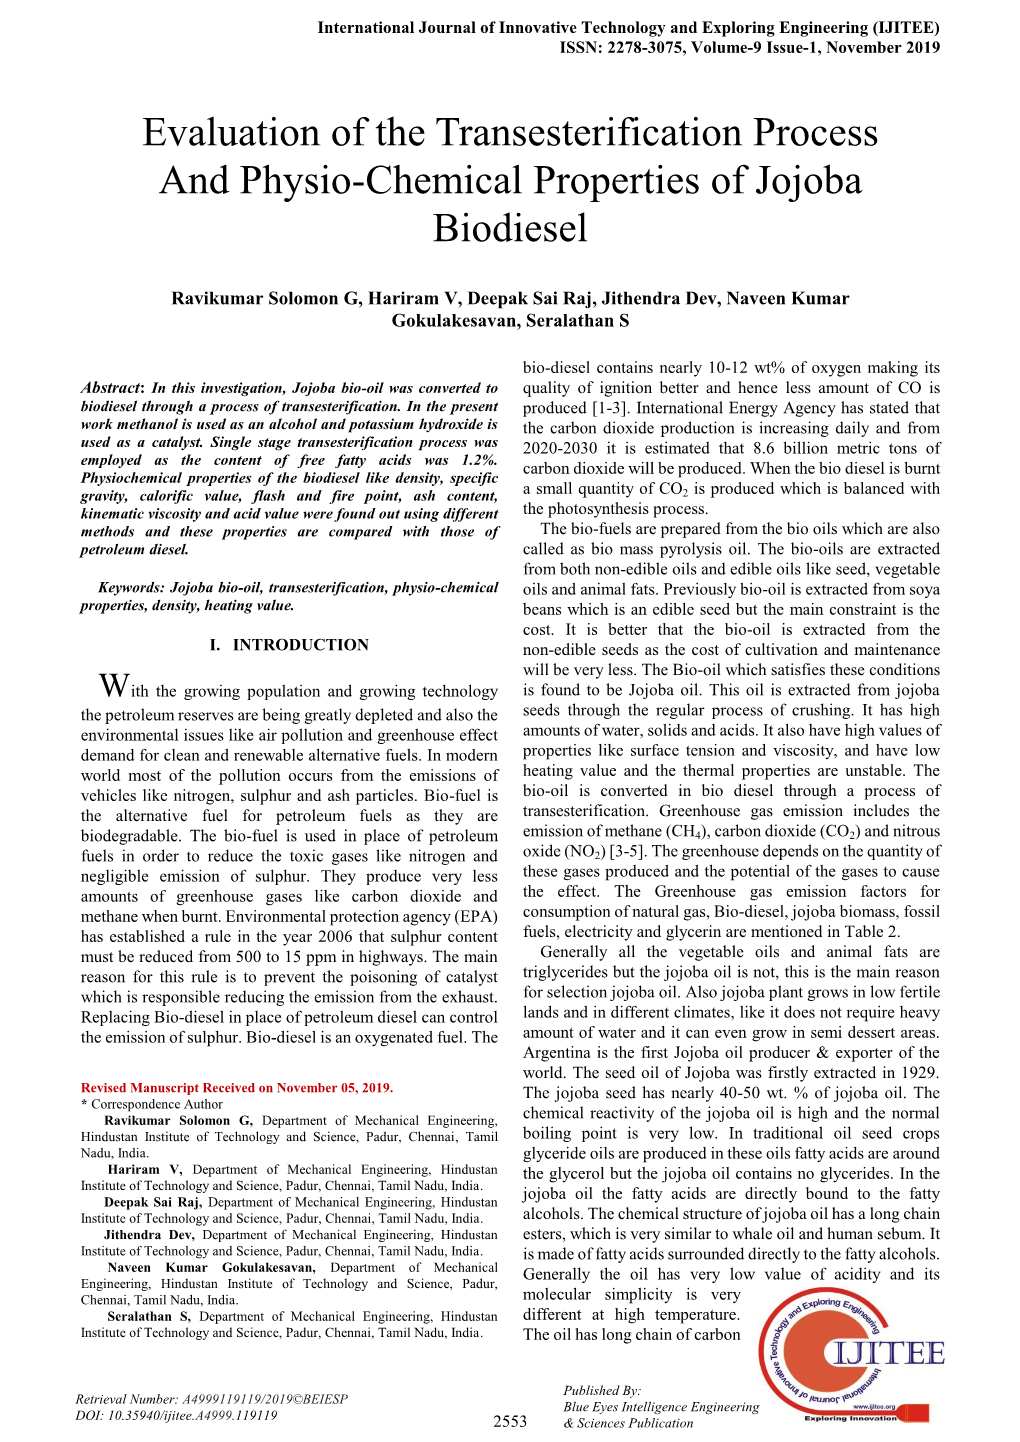 Evaluation of the Transesterification Process and Physio-Chemical Properties of Jojoba Biodiesel